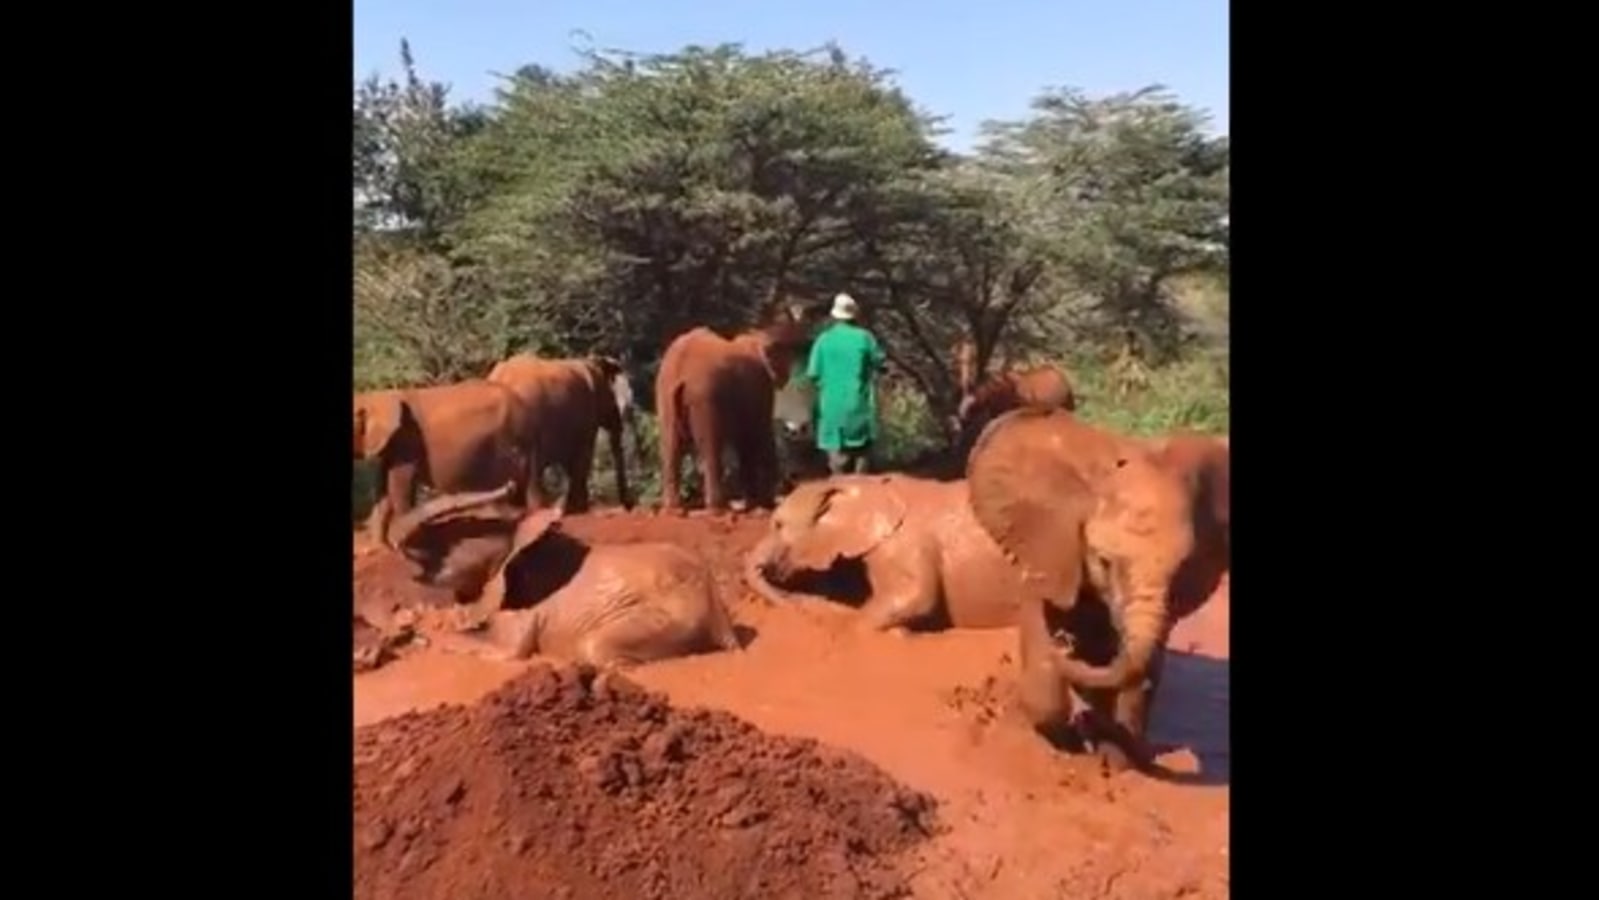 Baby elephants having a gala time splashing in mud will leave you smiling | Trending